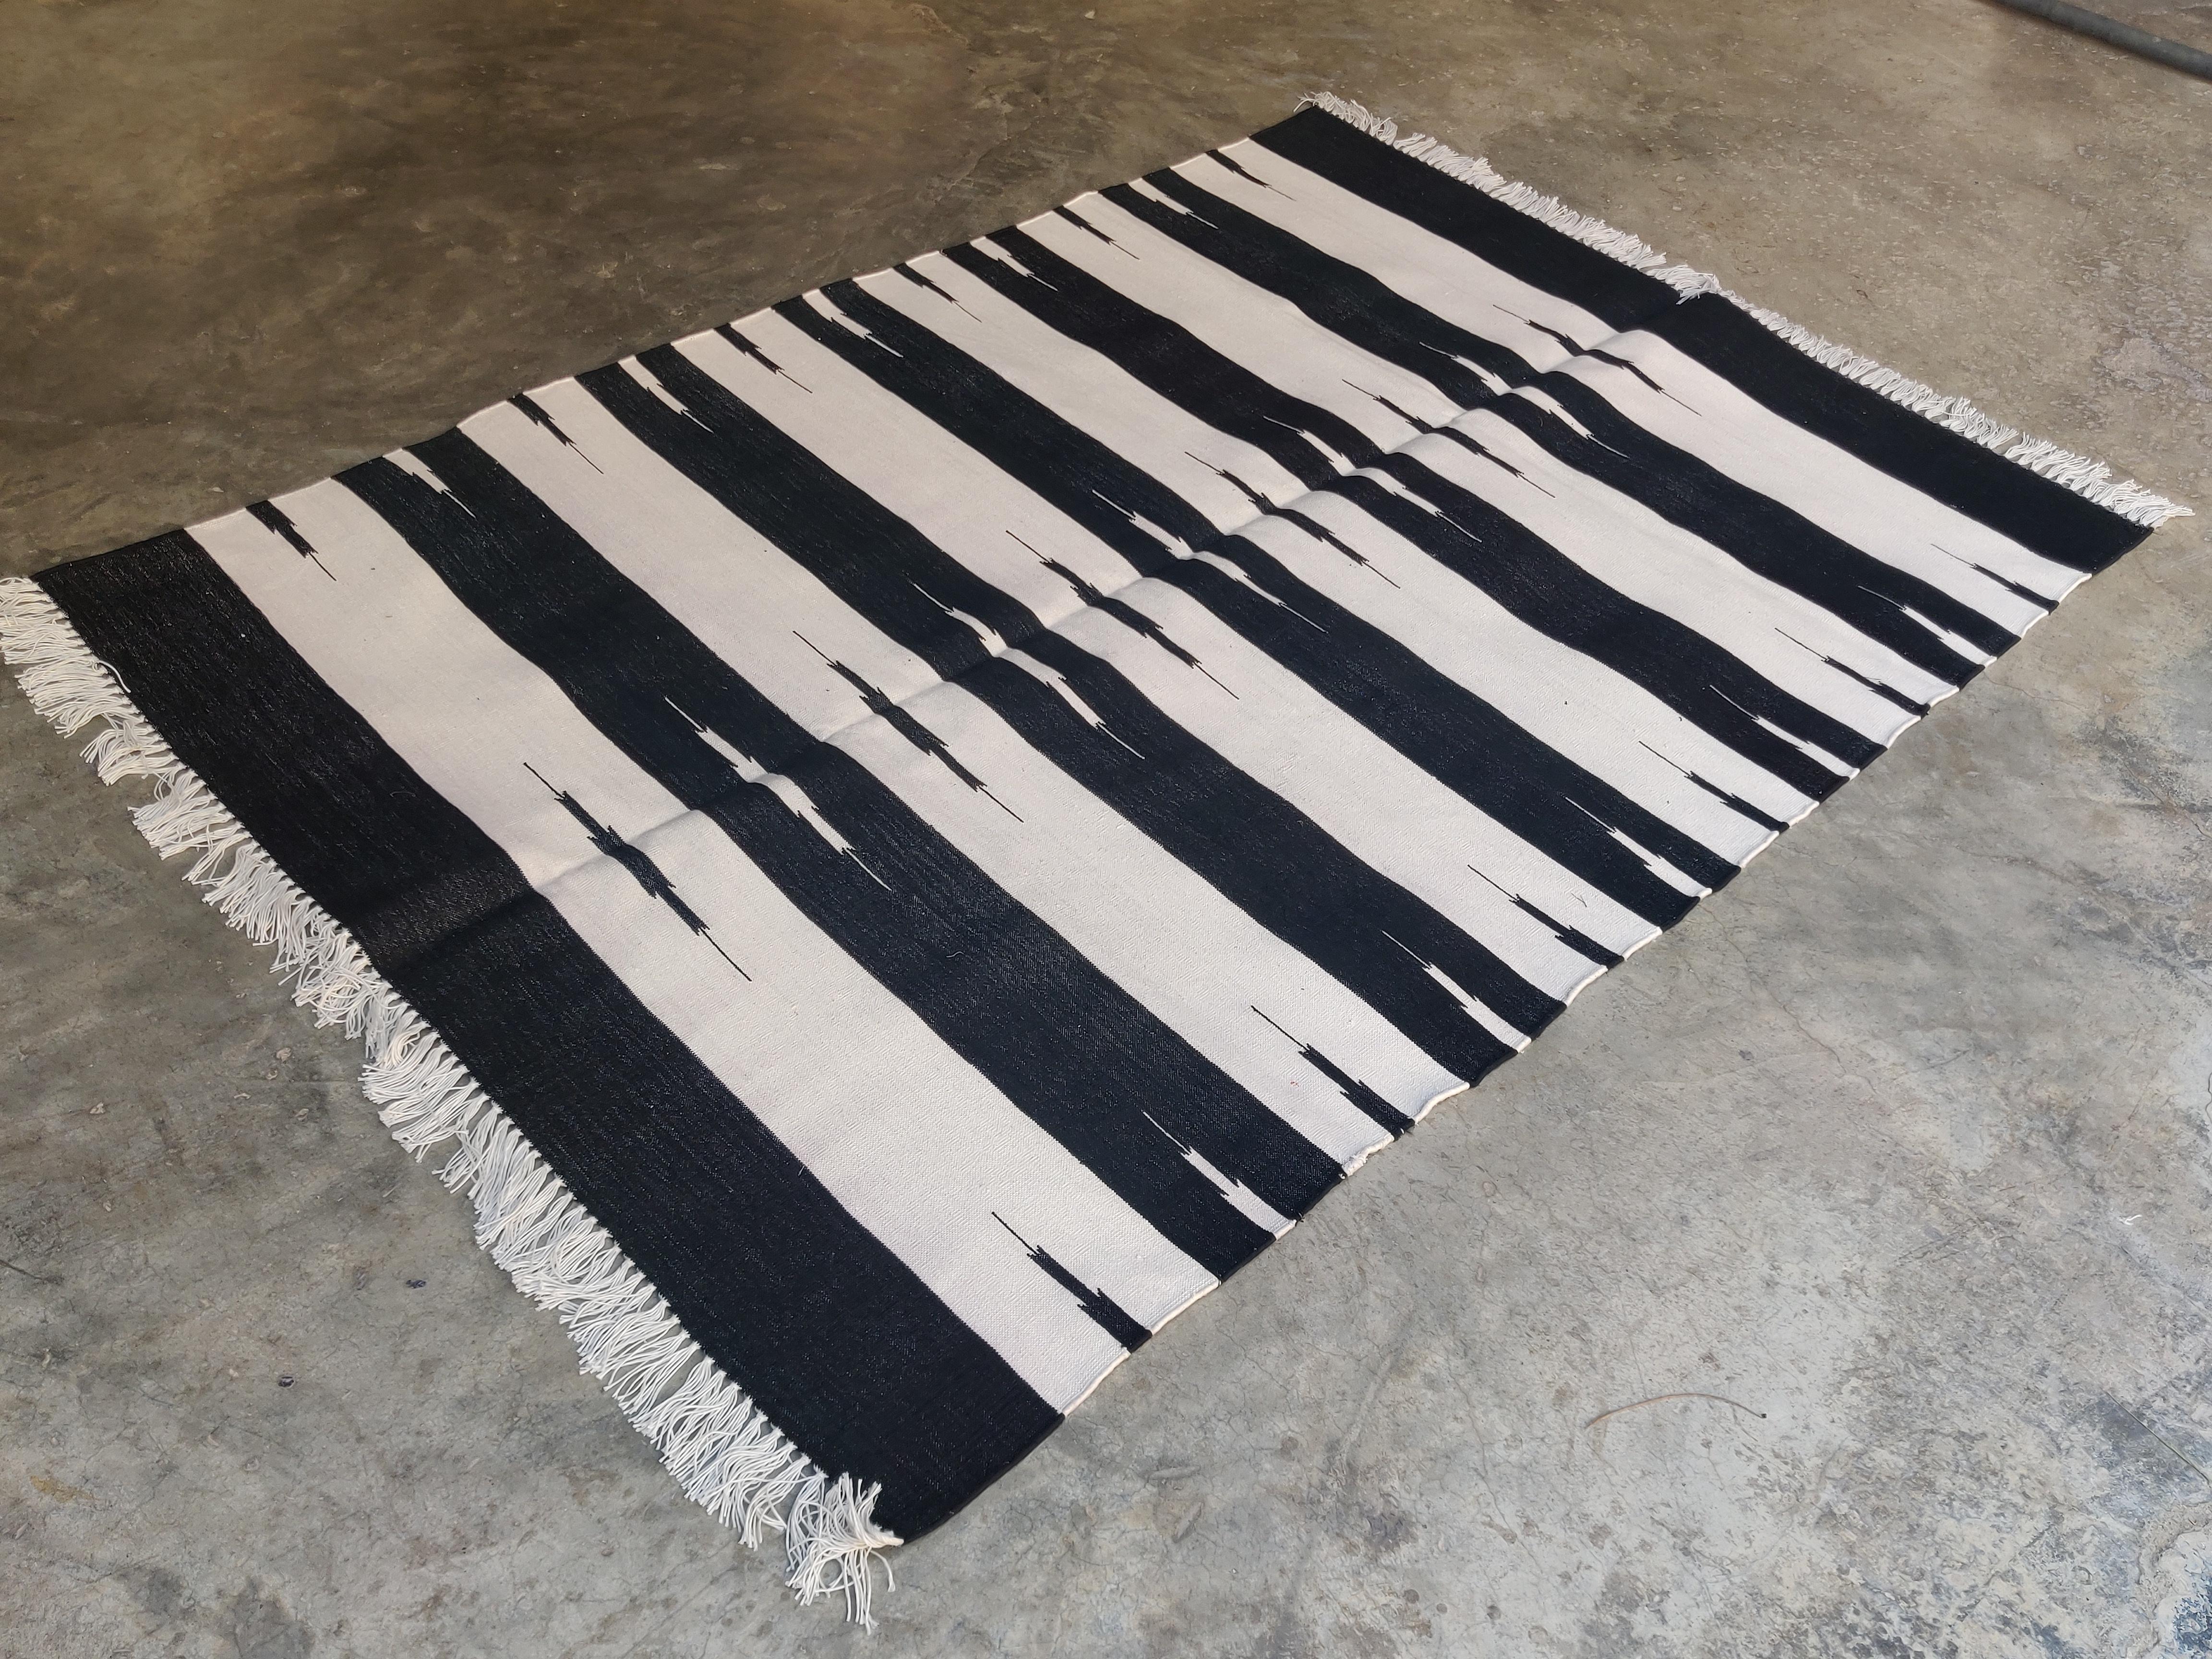 Cotton Vegetable Dyed Black And White Striped Indian Dhurrie Rug-4'x6' 

These special flat-weave dhurries are hand-woven with 15 ply 100% cotton yarn. Due to the special manufacturing techniques used to create our rugs, the size and color of each